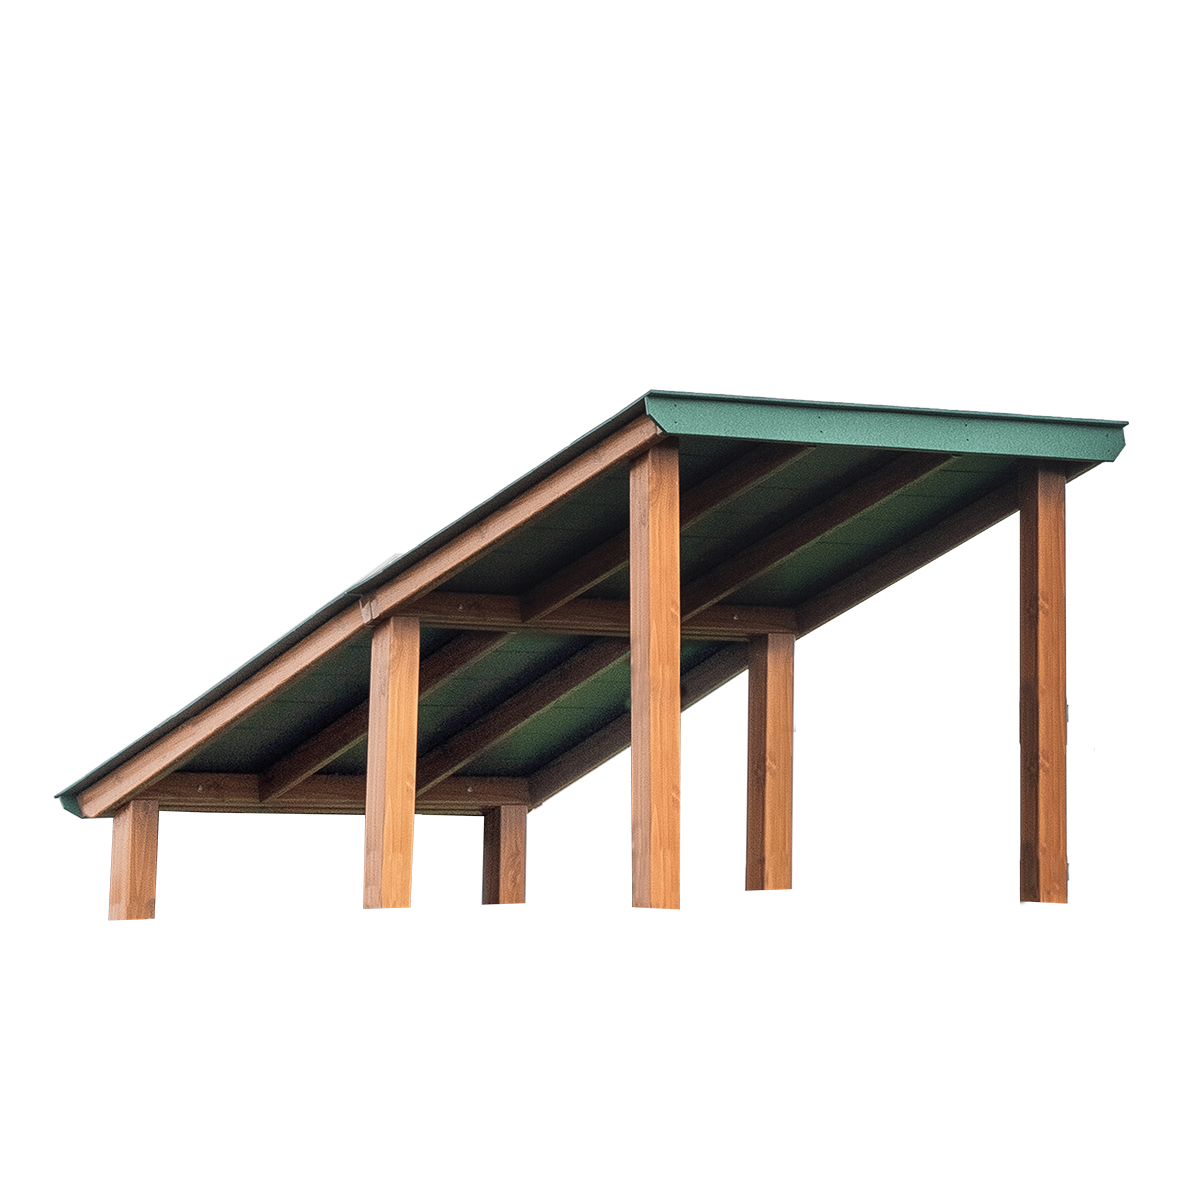 double lean to roof with wooden support beams